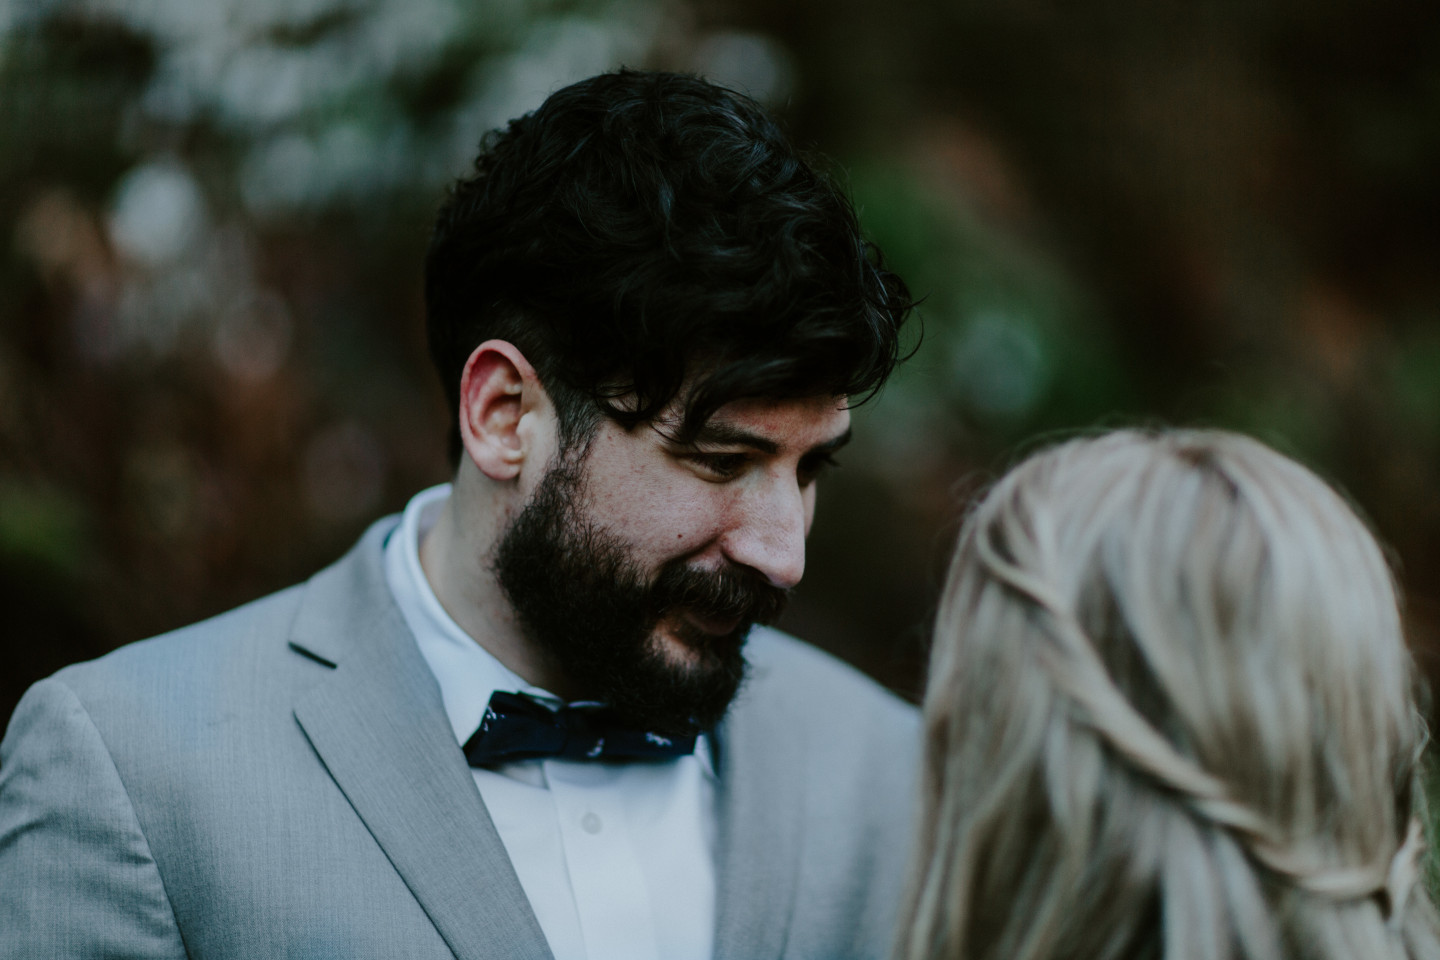 Boris smiles at Tyanna. Adventure elopement in the Columbia River Gorge by Sienna Plus Josh.